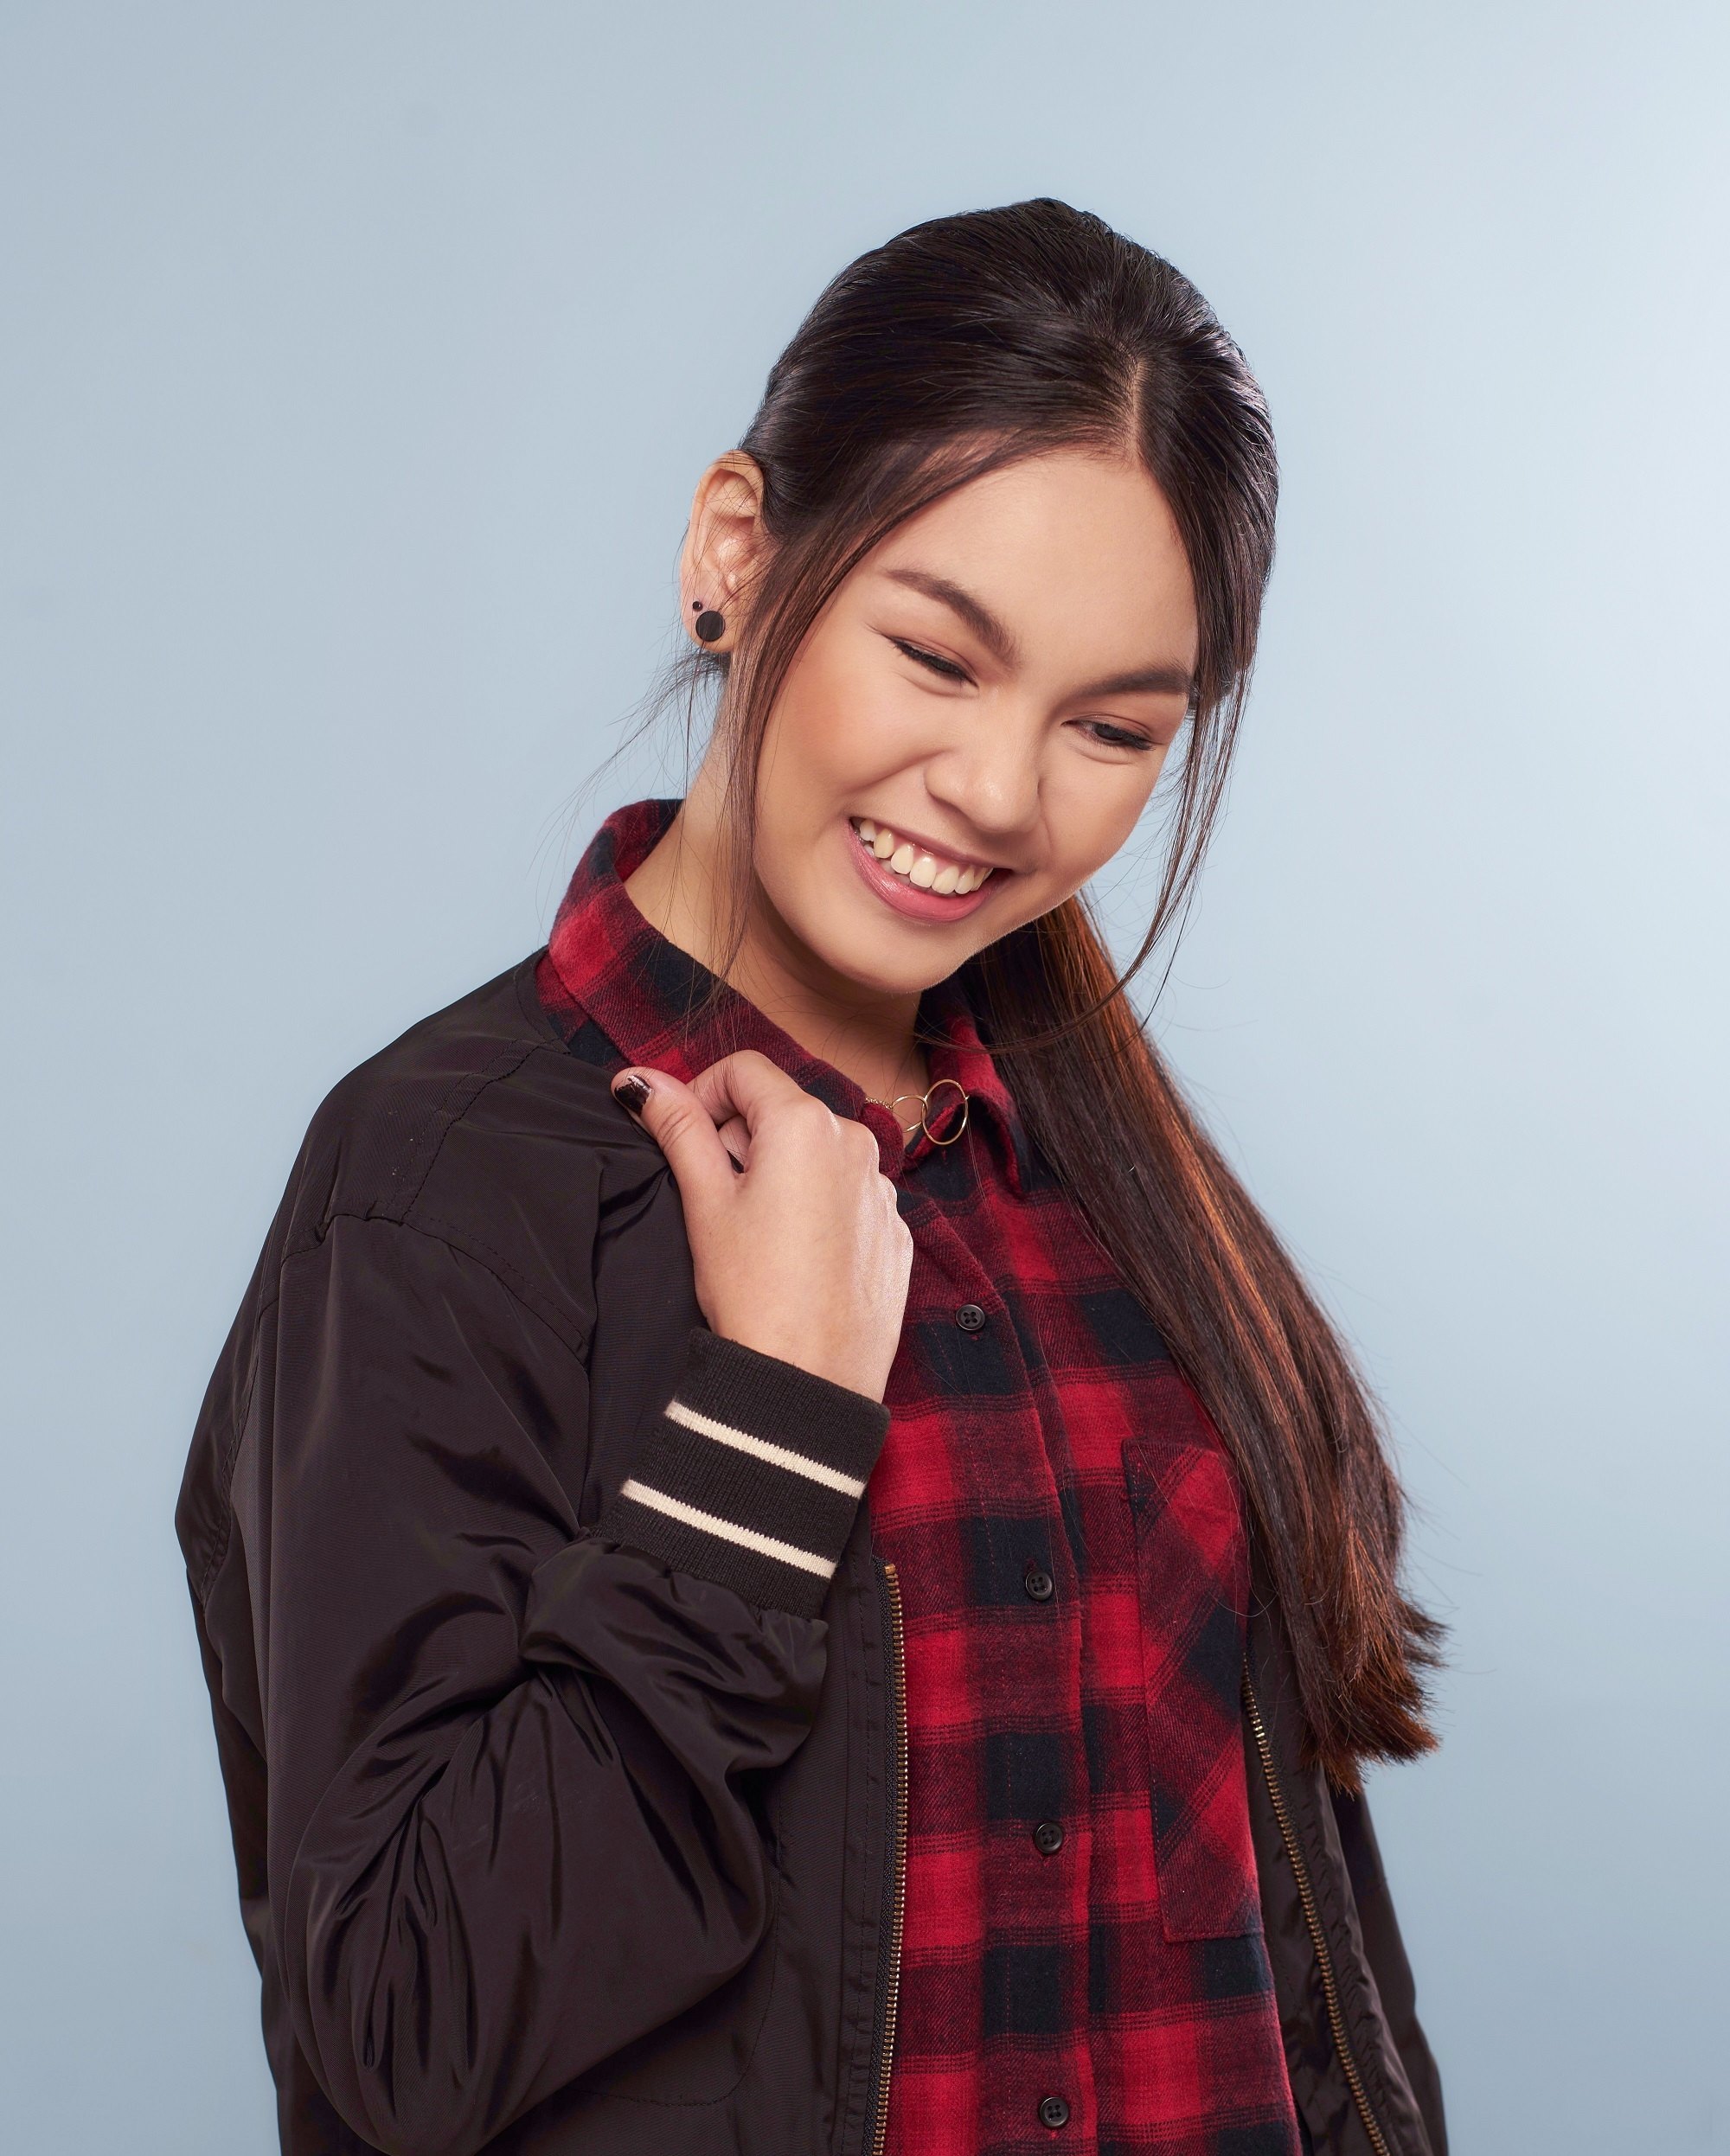 Advent calendar: Asian woman with long black hair in a ponytail wearing a red plain blouse and black jacket